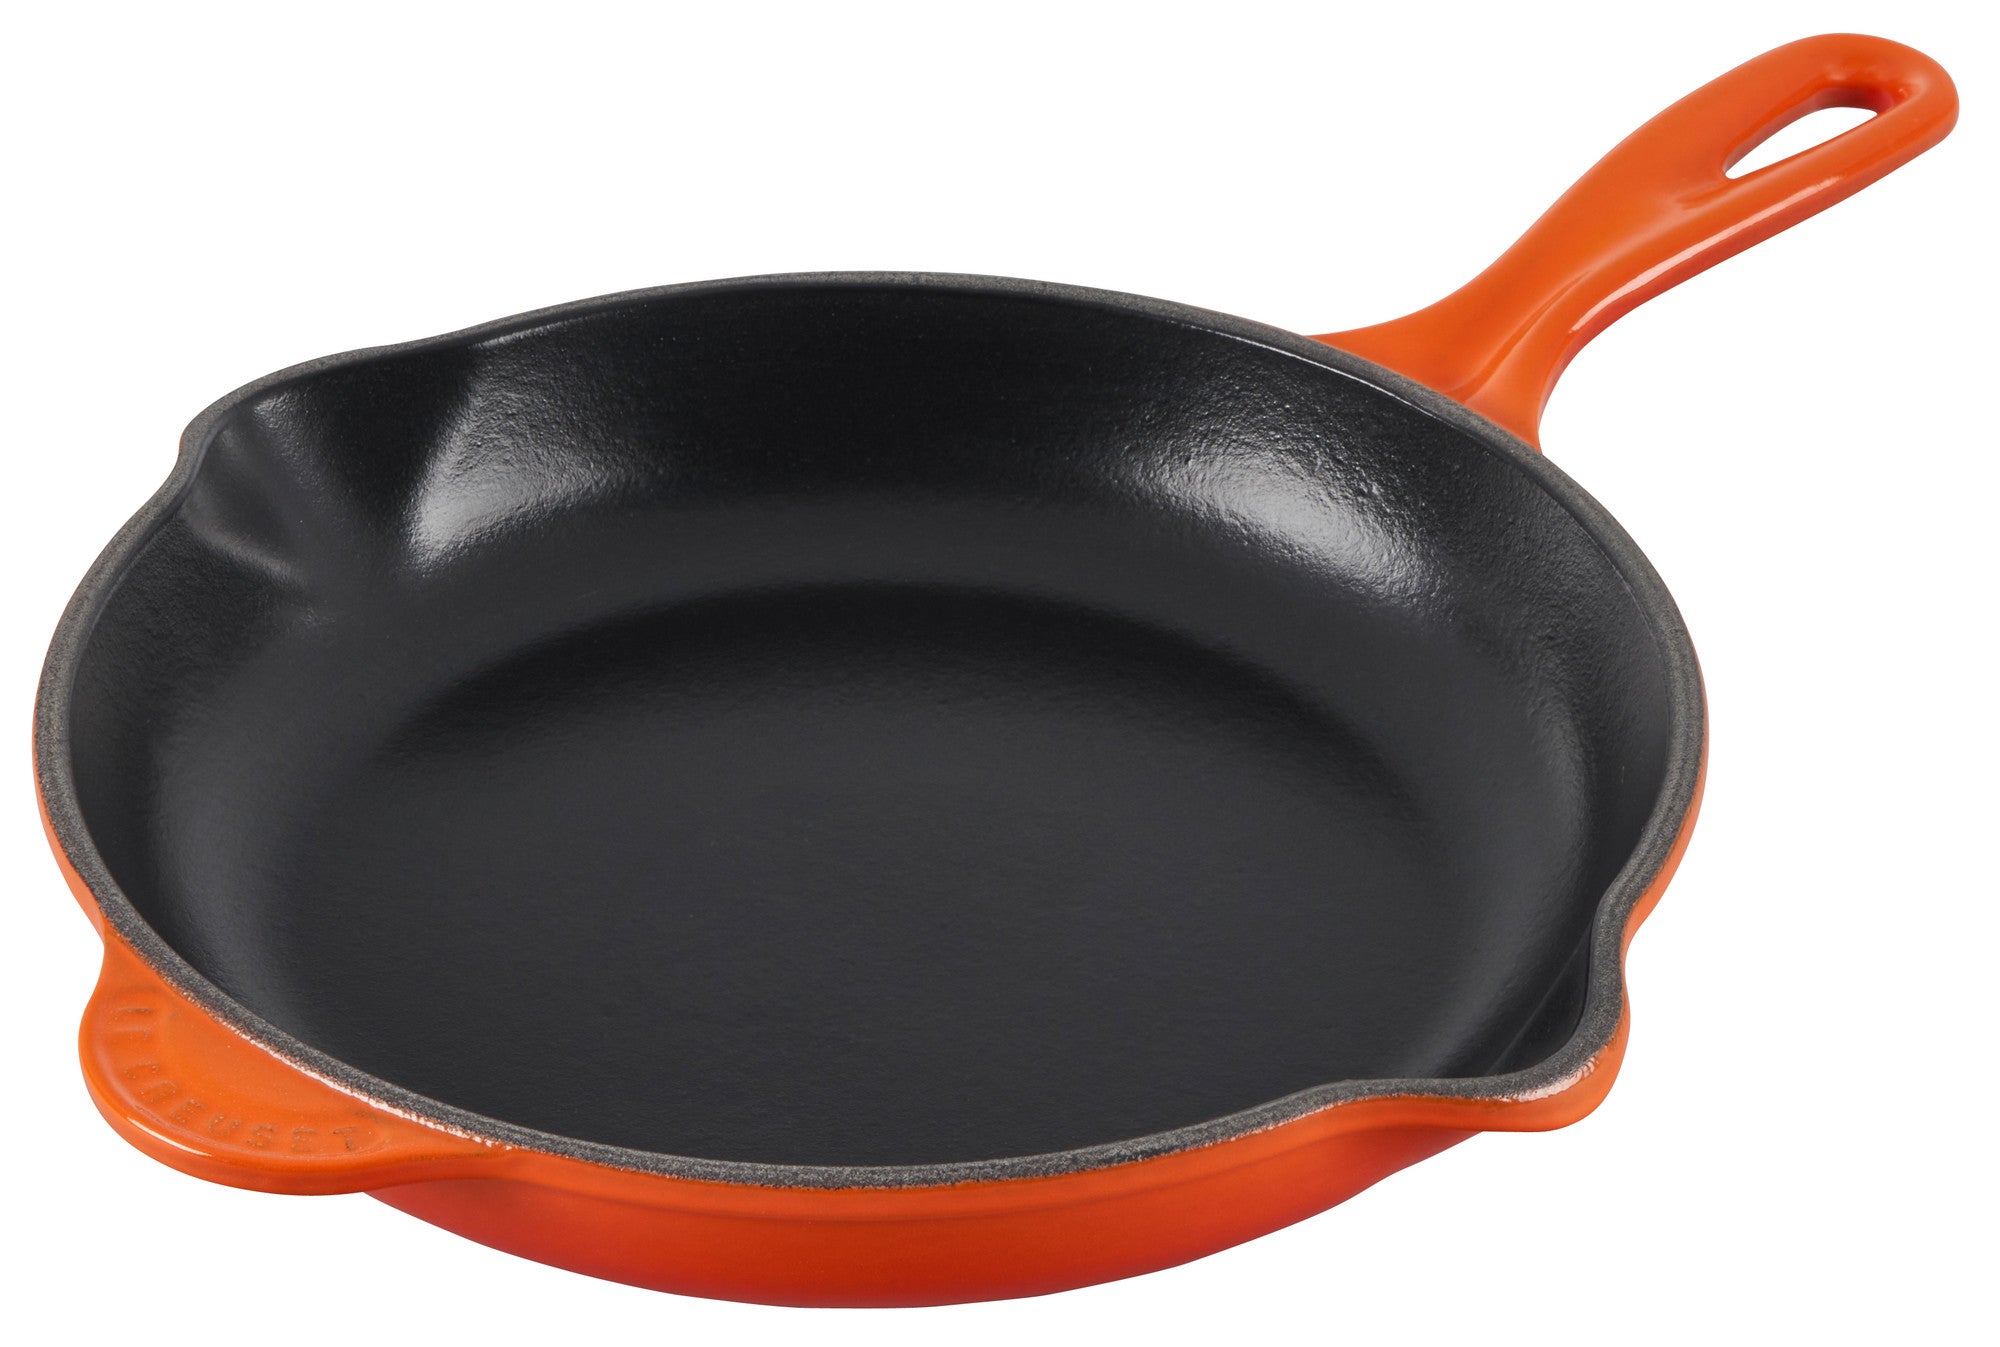 Staub Cast Iron 11-inch Traditional Skillet - Dark Blue, Made in France